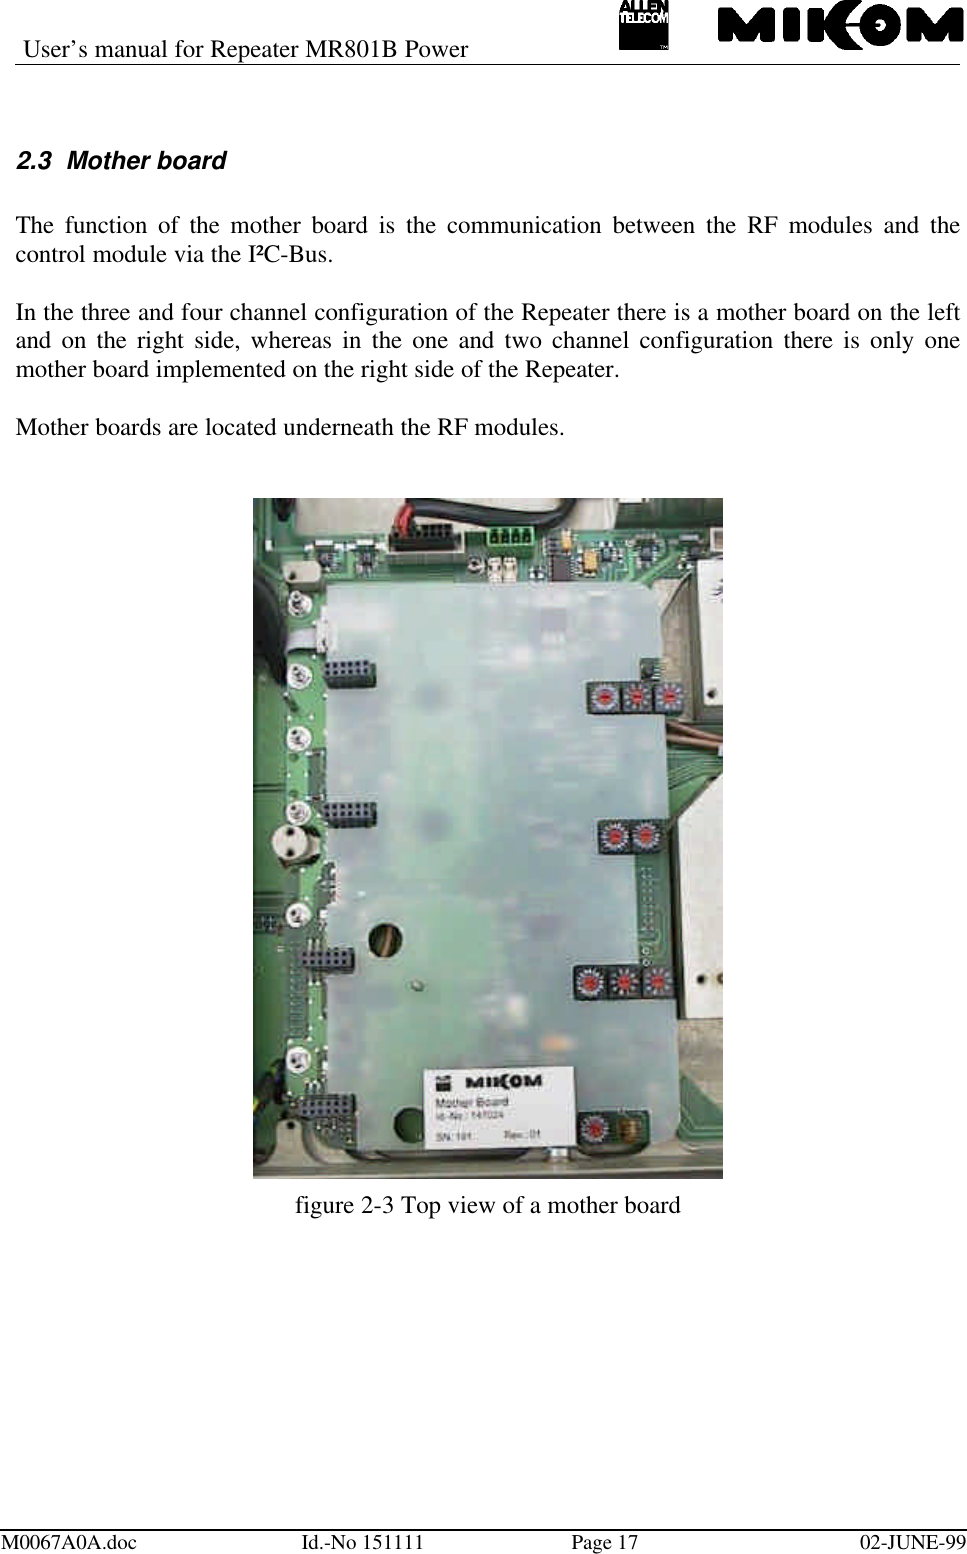 User’s manual for Repeater MR801B PowerM0067A0A.doc Id.-No 151111 Page 17 02-JUNE-992.3 Mother boardThe function of the mother board is the communication between the RF modules and thecontrol module via the I²C-Bus.In the three and four channel configuration of the Repeater there is a mother board on the leftand on the right side, whereas in the one and two channel configuration there is only onemother board implemented on the right side of the Repeater.Mother boards are located underneath the RF modules.figure 2-3 Top view of a mother board